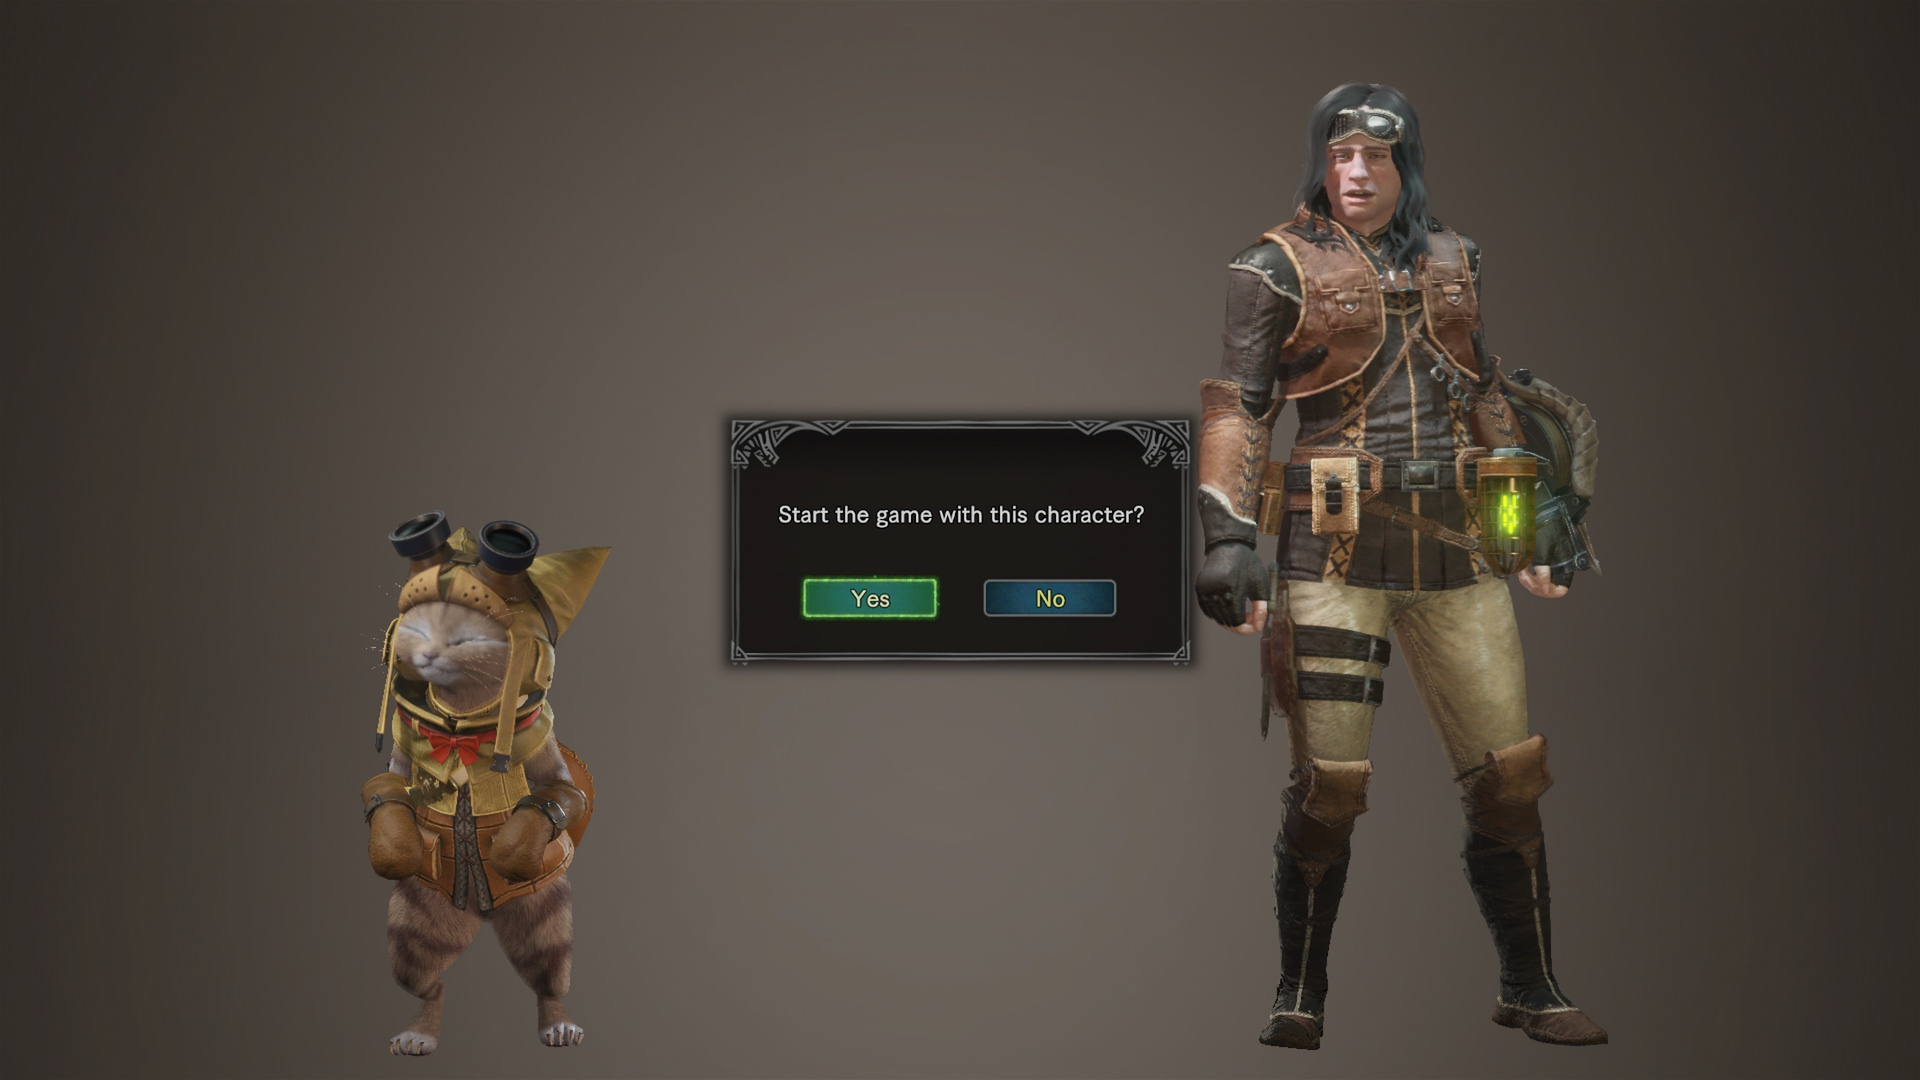 Players Are Having Fun With Monster Hunter: World’s Character Creator